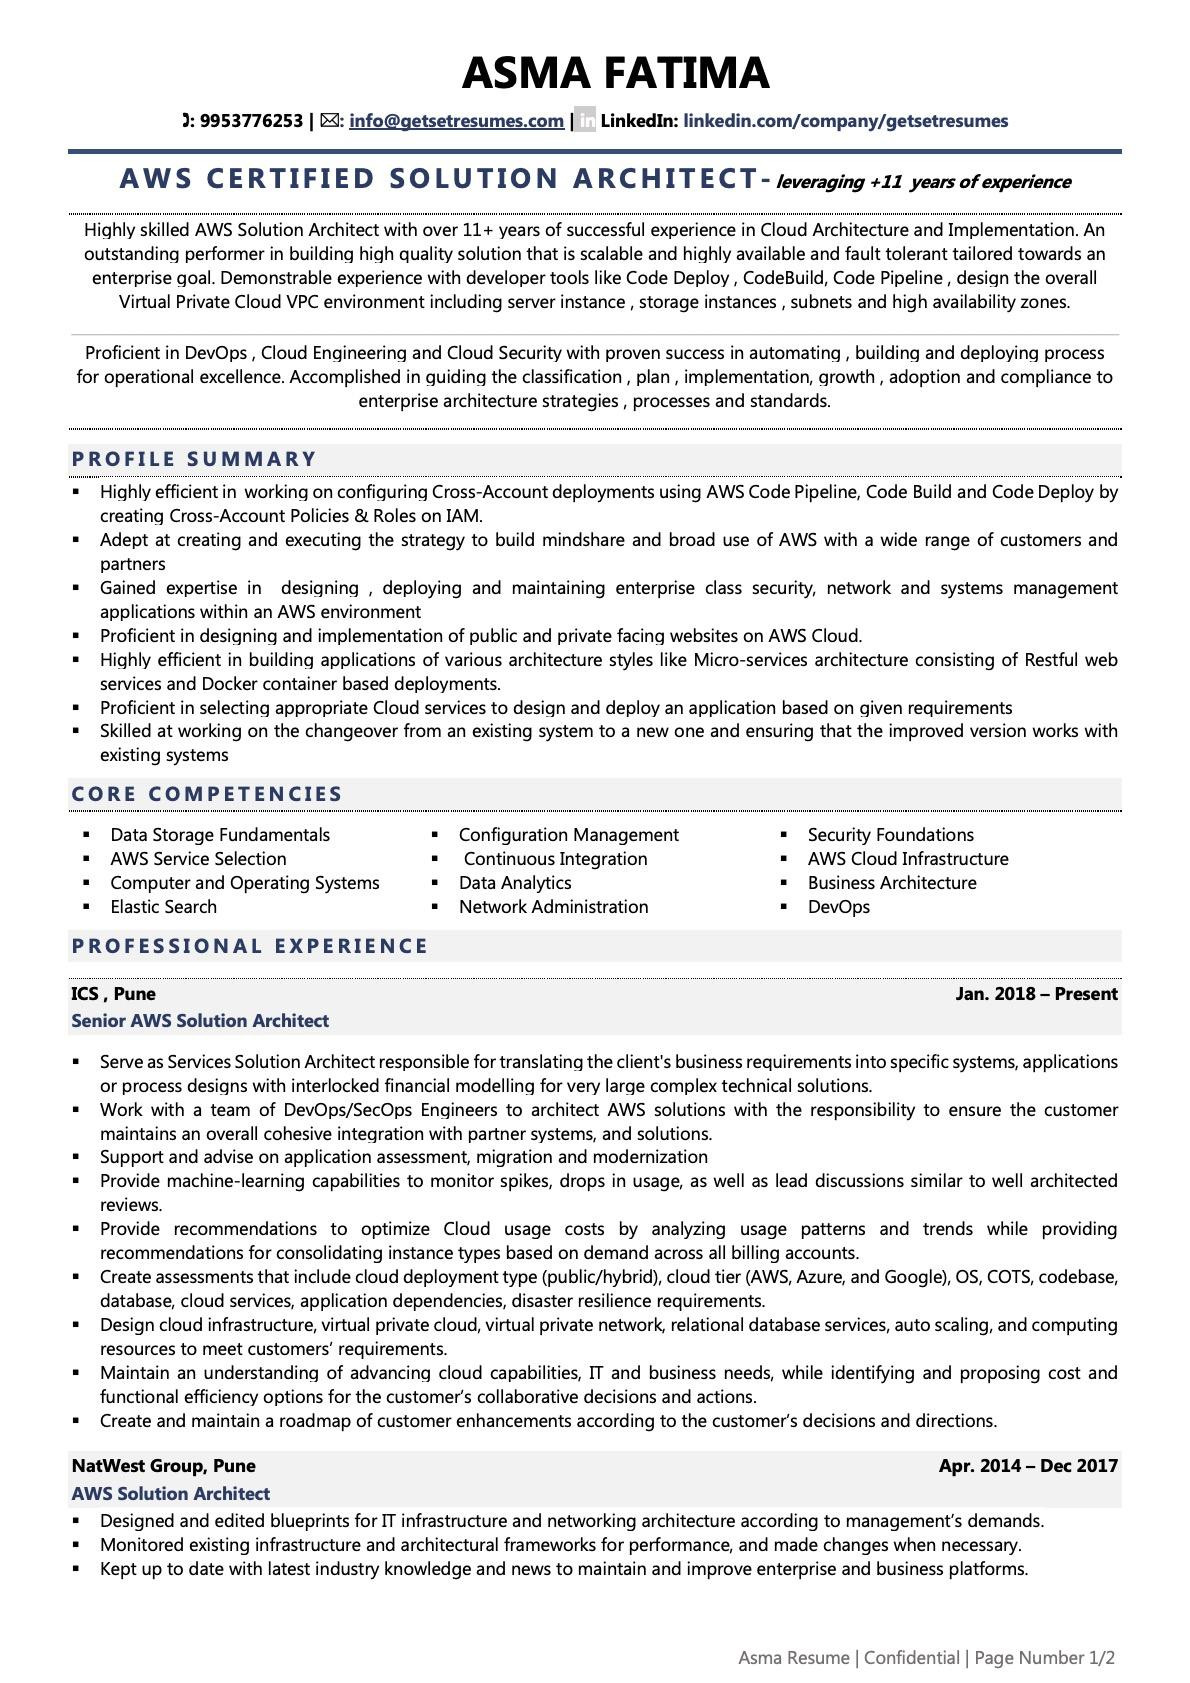 Sample Resume for Two Year Experience In Aws Aws solution Architect Resume Examples & Template (with Job …